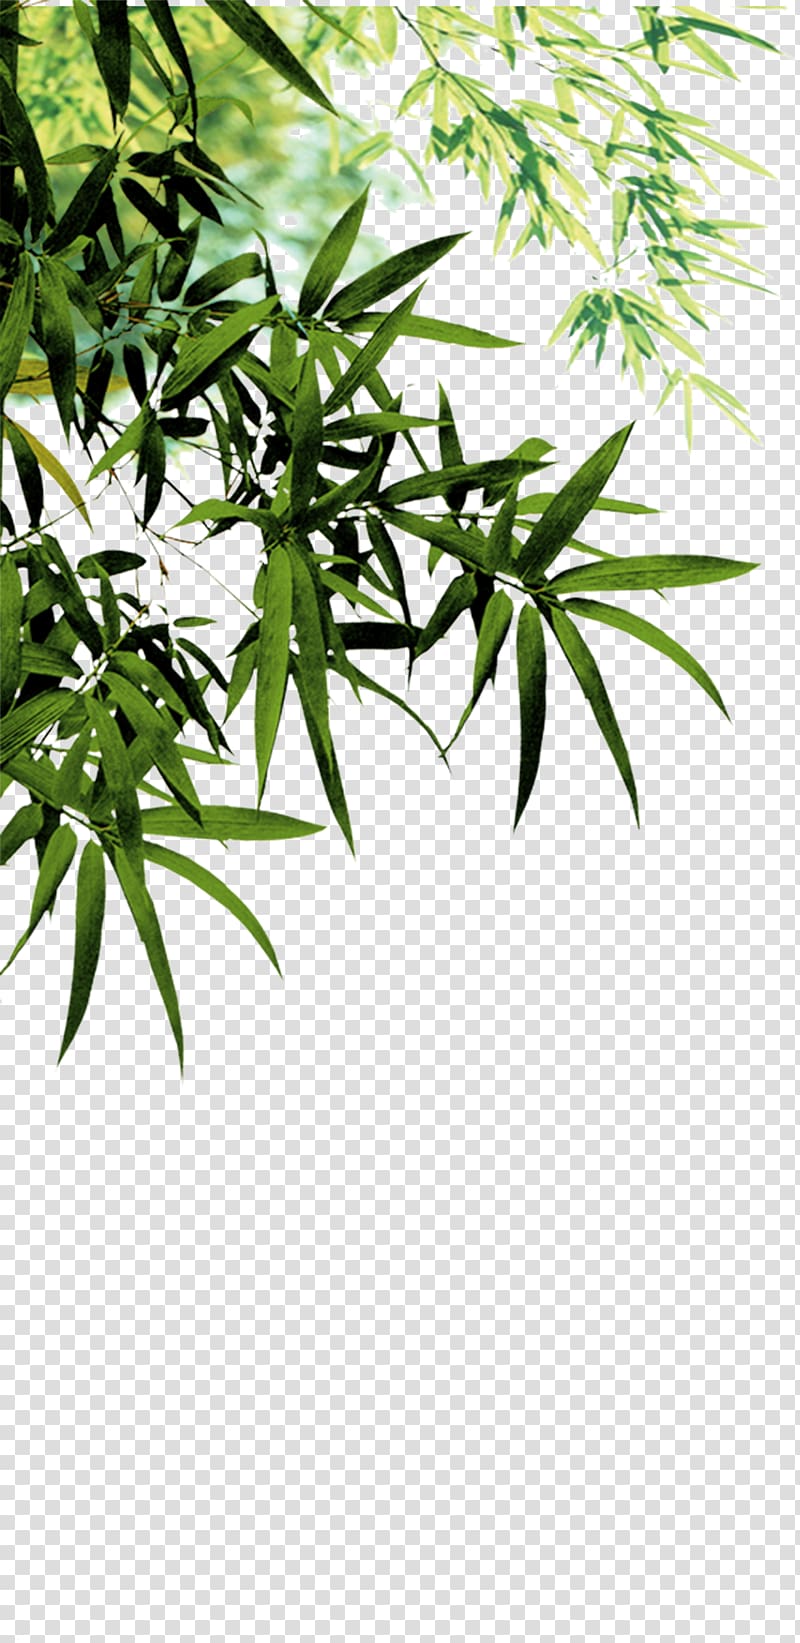 green leafed plant illustration, Anji County Bamboo charcoal Software, Bamboo leaves transparent background PNG clipart